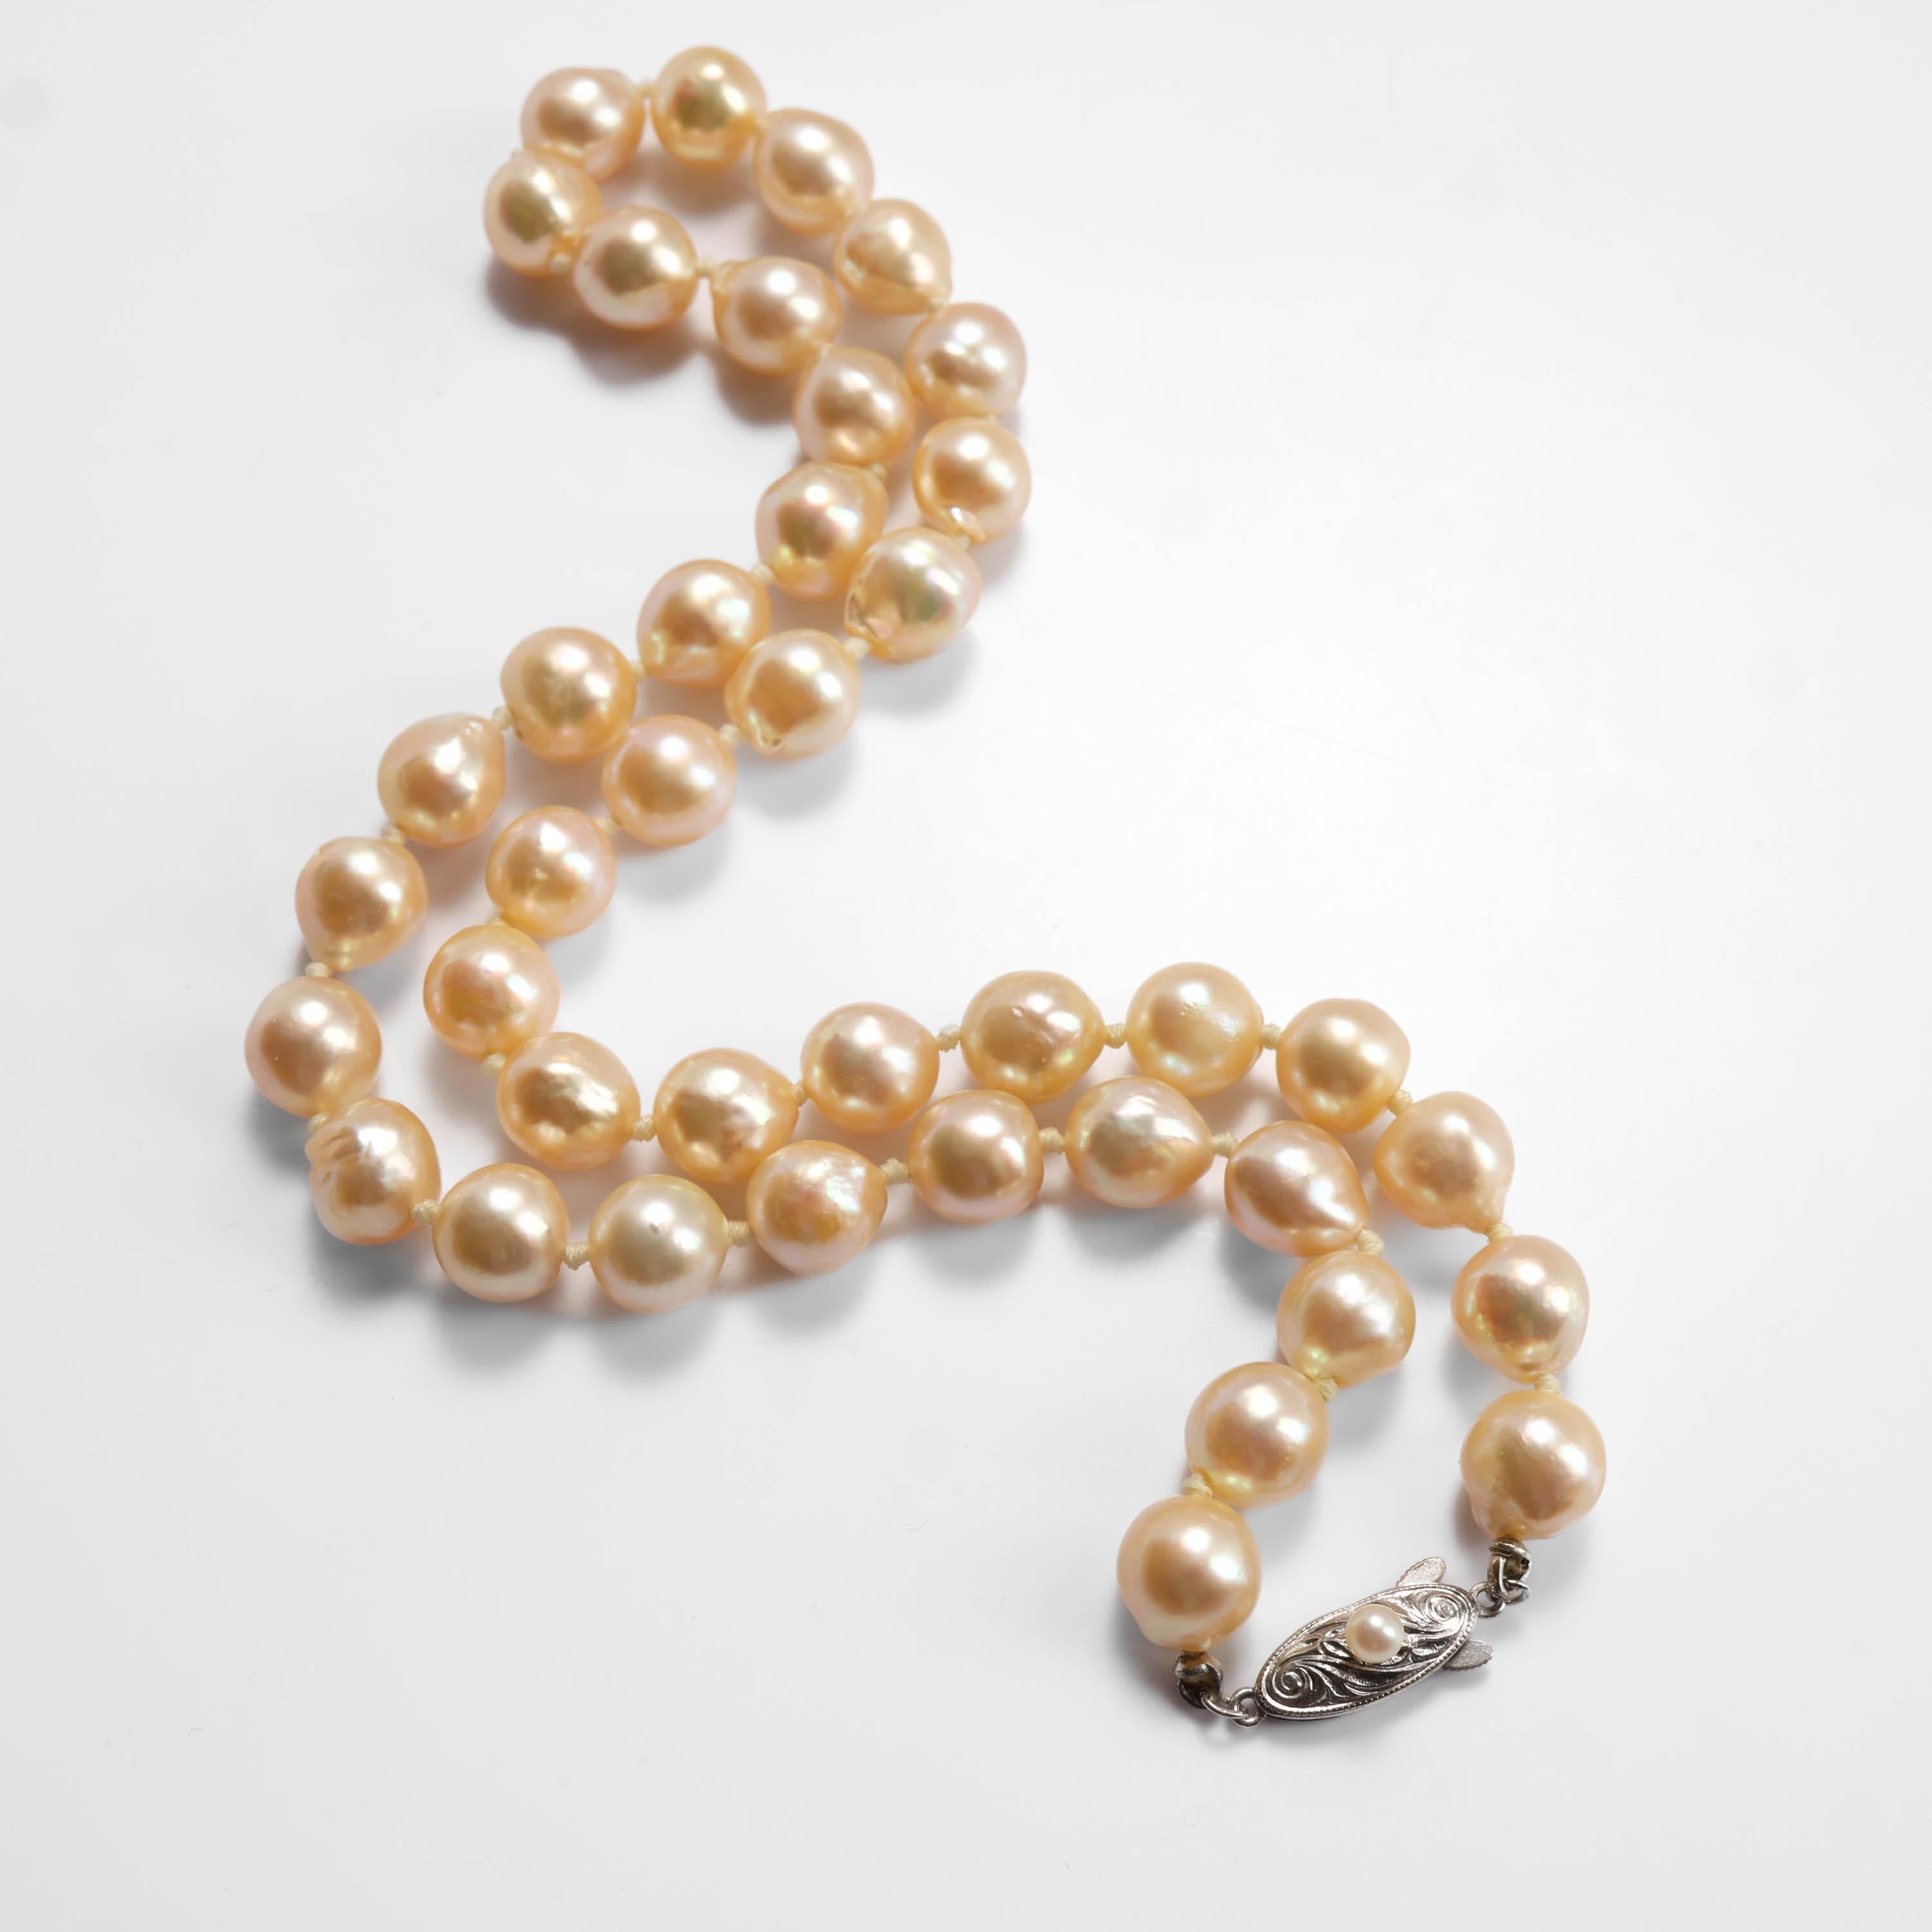 Bead South Sea Pearl Necklace Vers. 1.0